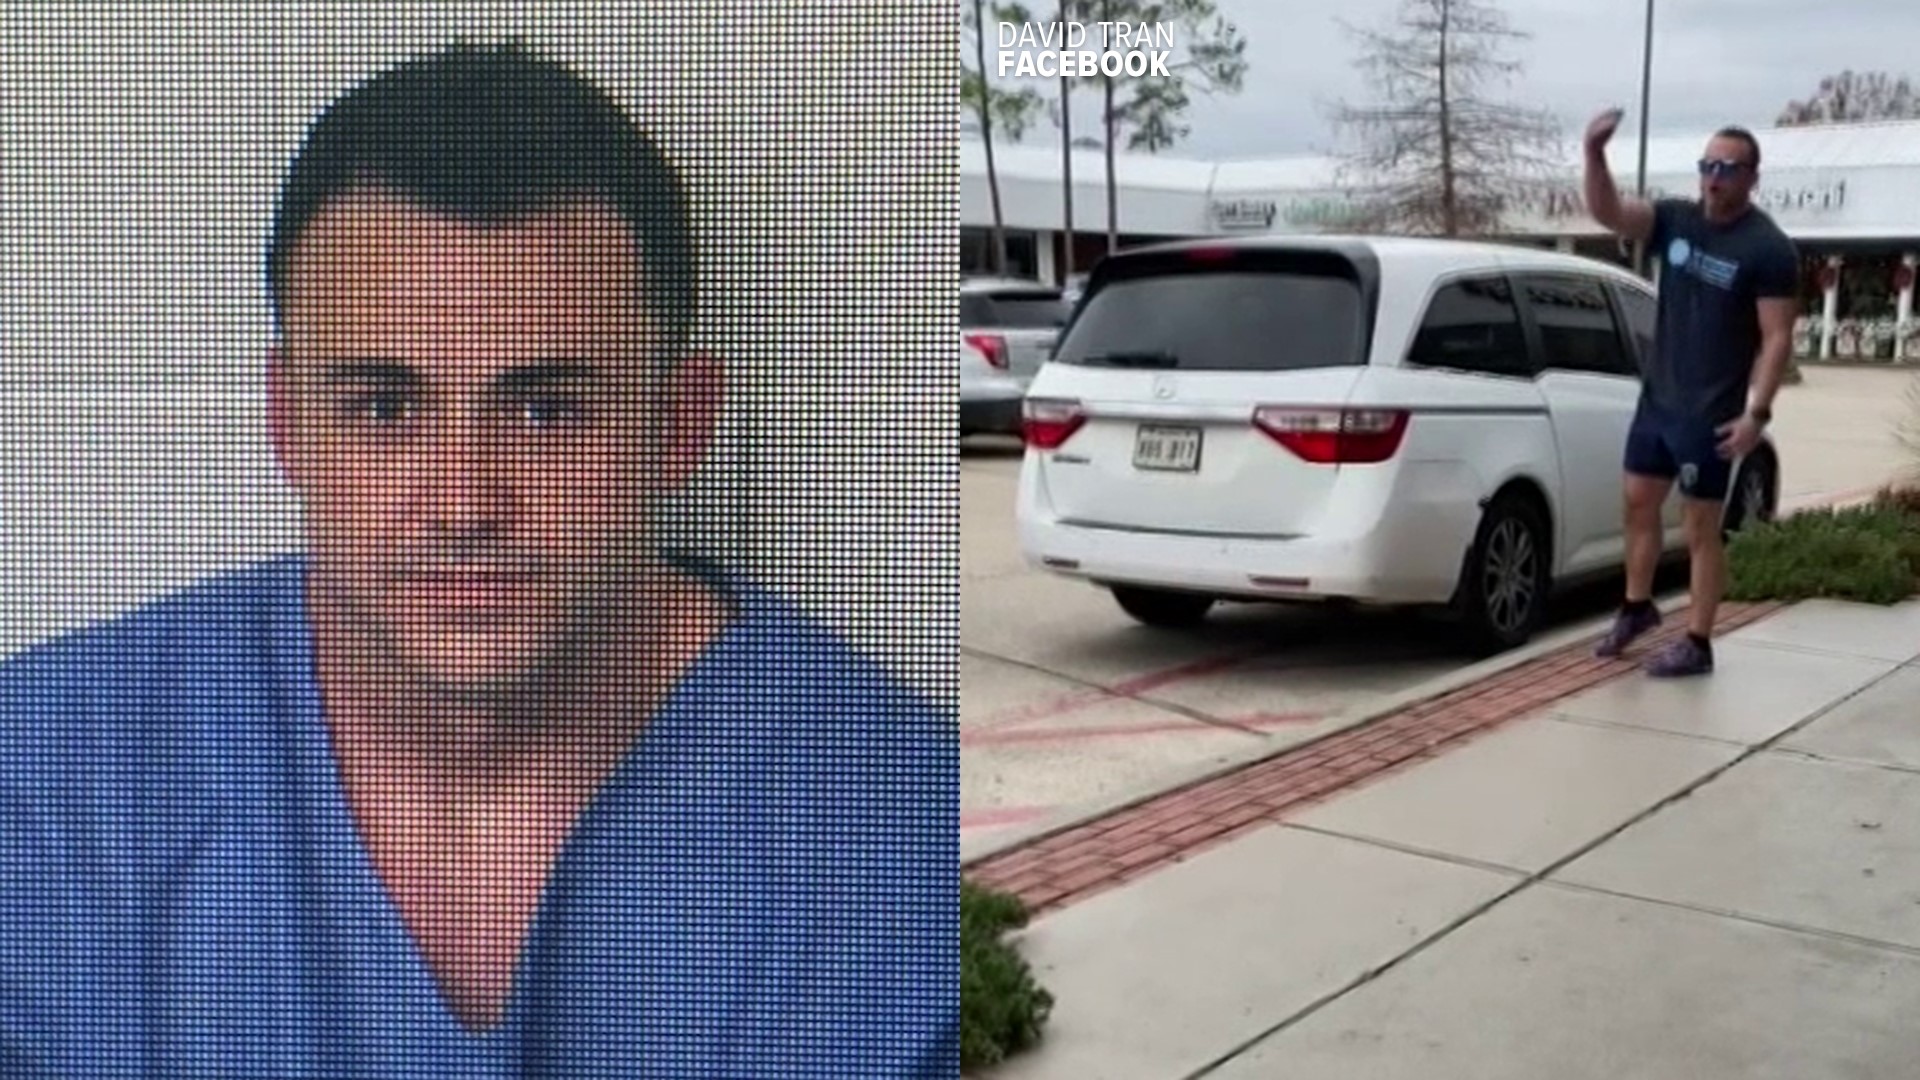 Police say Richard Suarez was arrested after he checked himself into the hospital for an unknown reason.